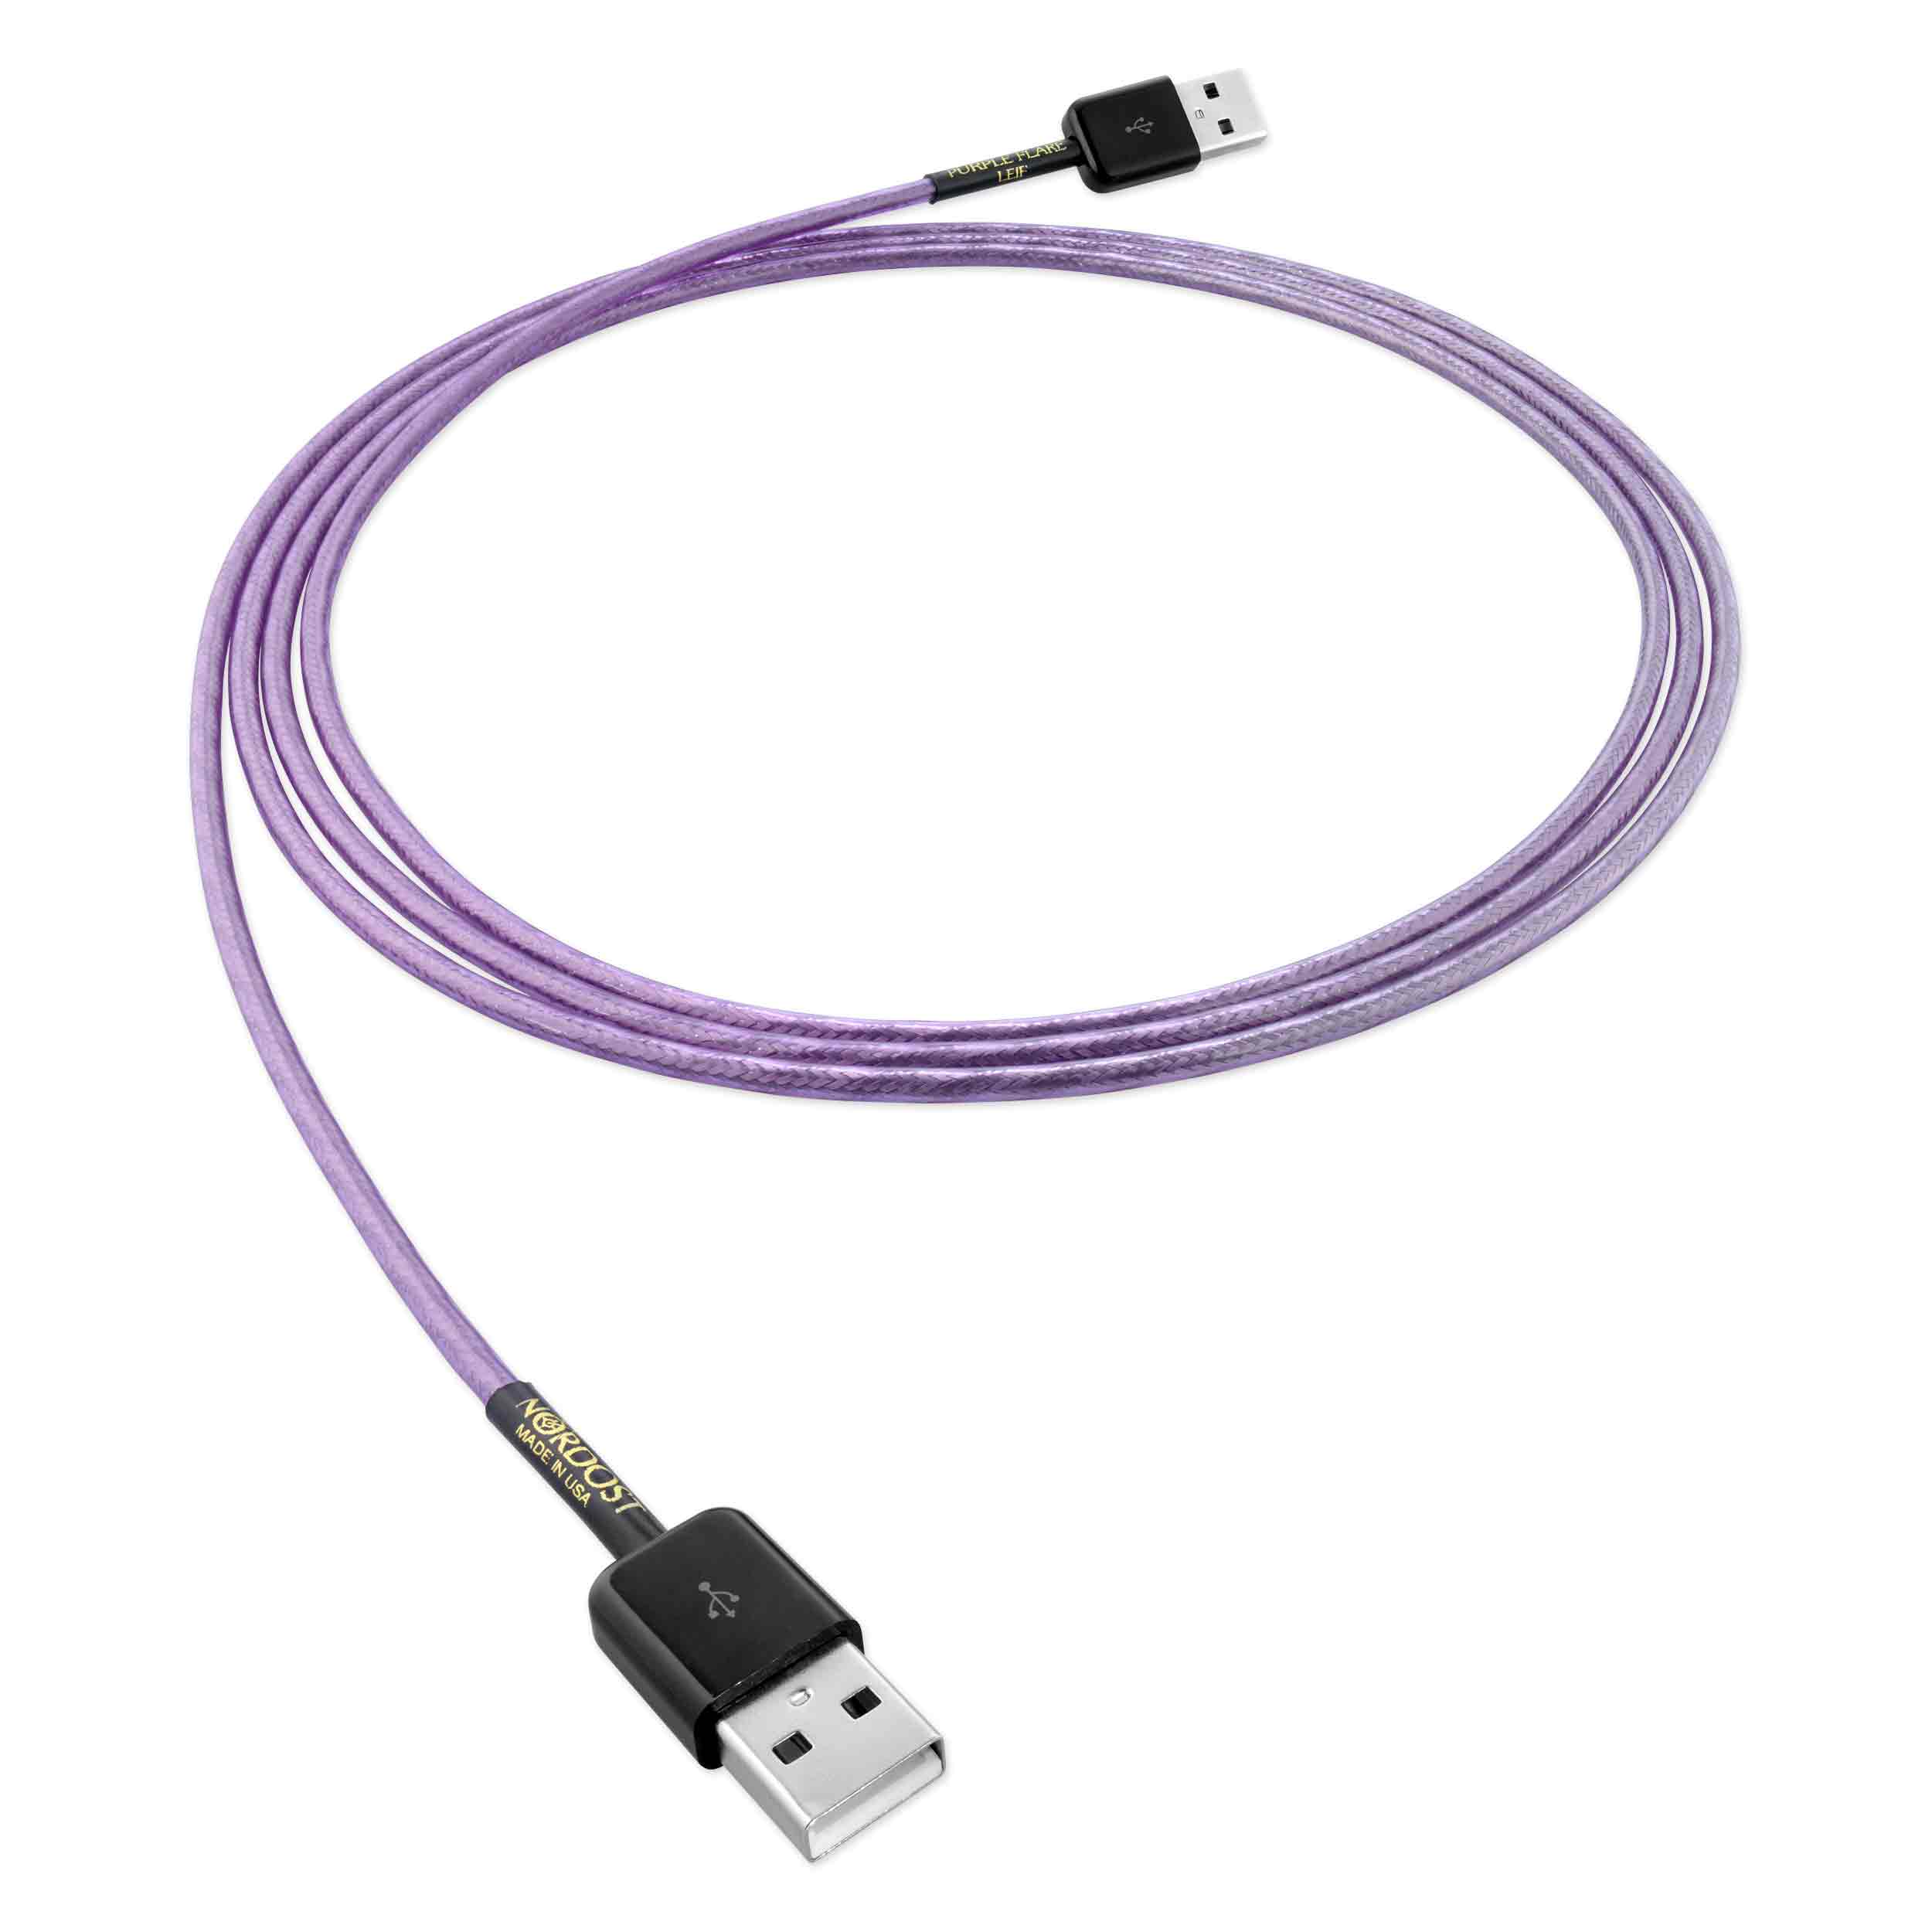 Dây USB 2.0 Nordost Leif Series Purple Flare